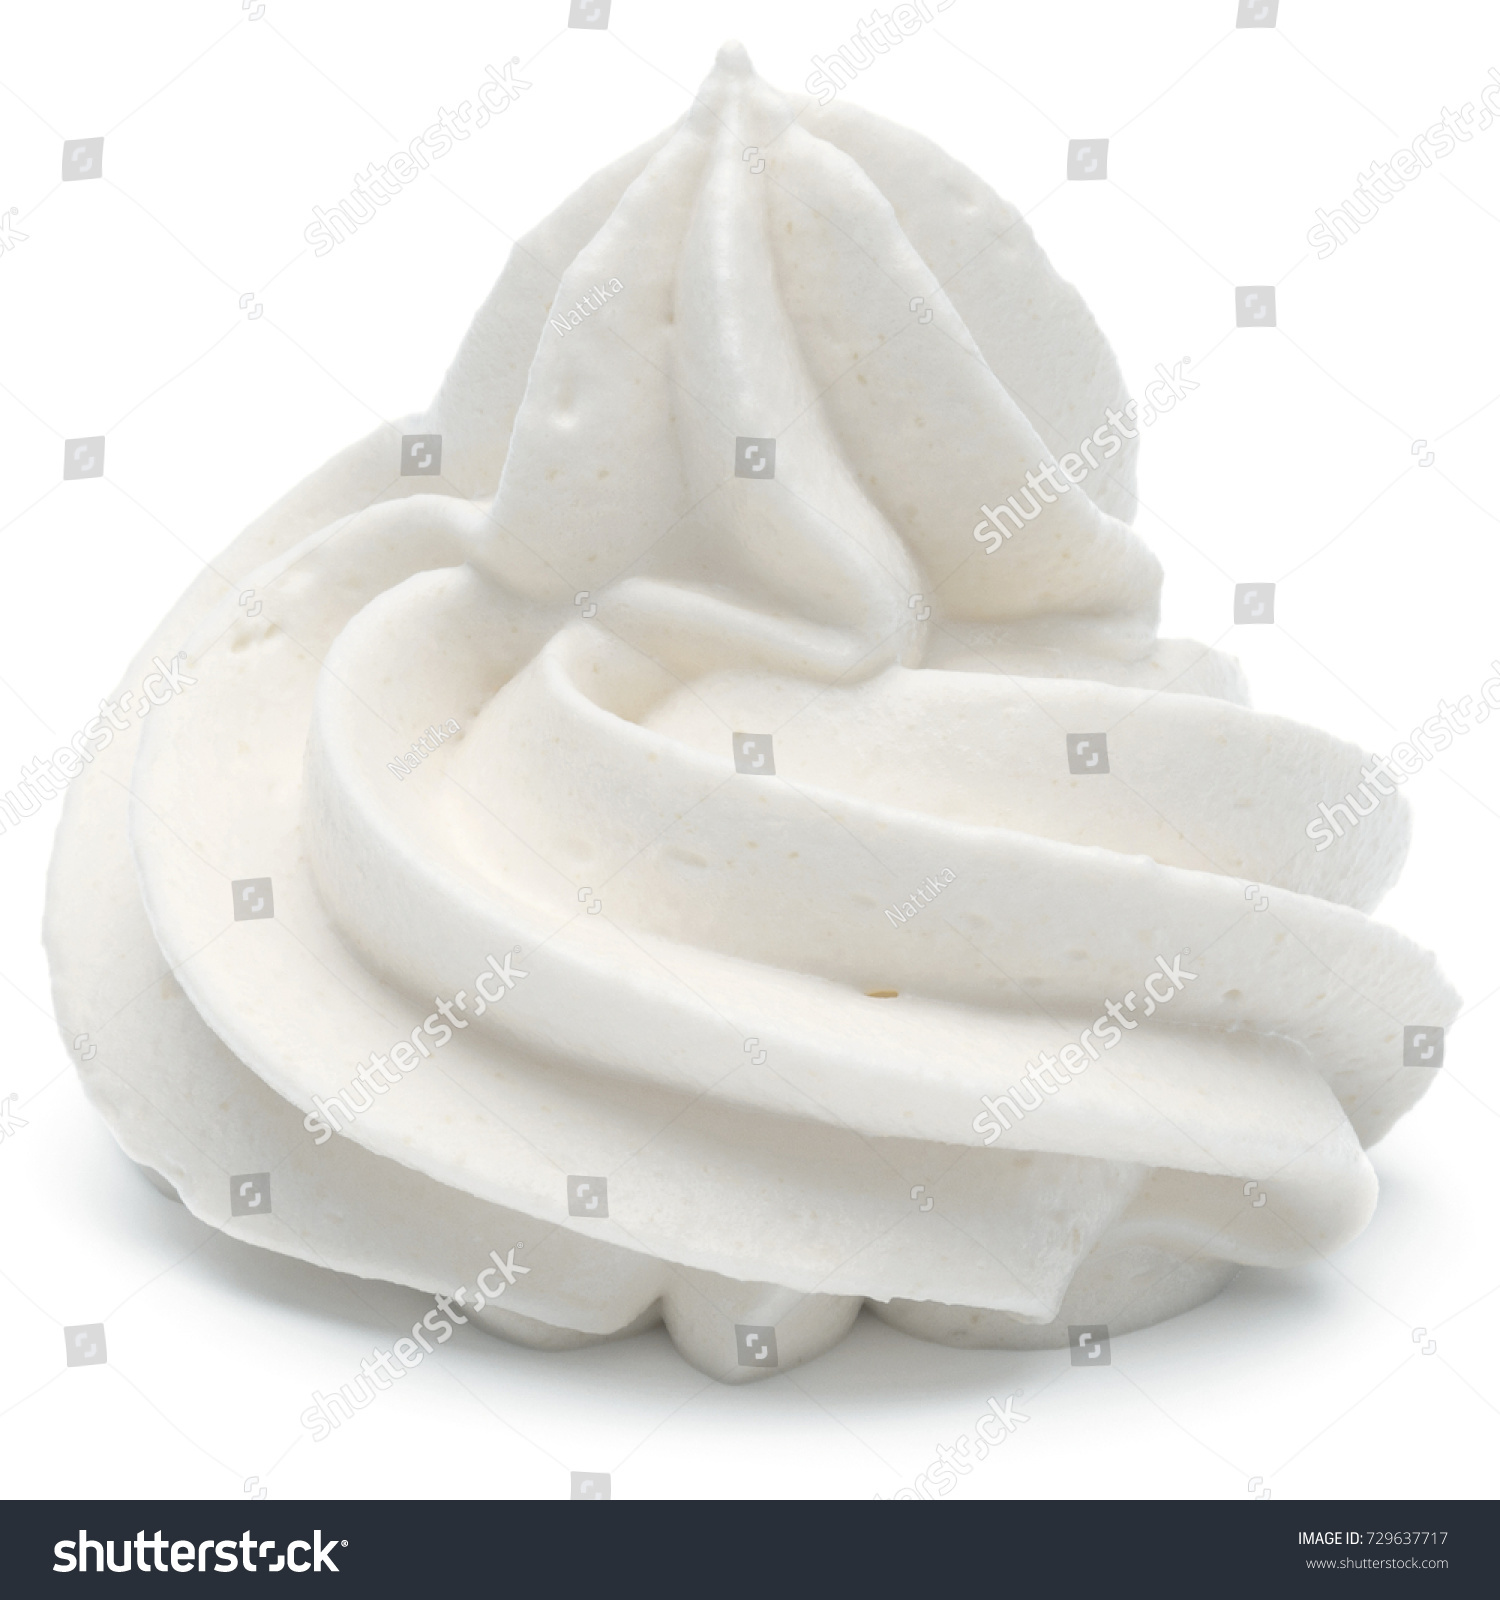 Whipped cream swirl  isolated on white background cutout #729637717